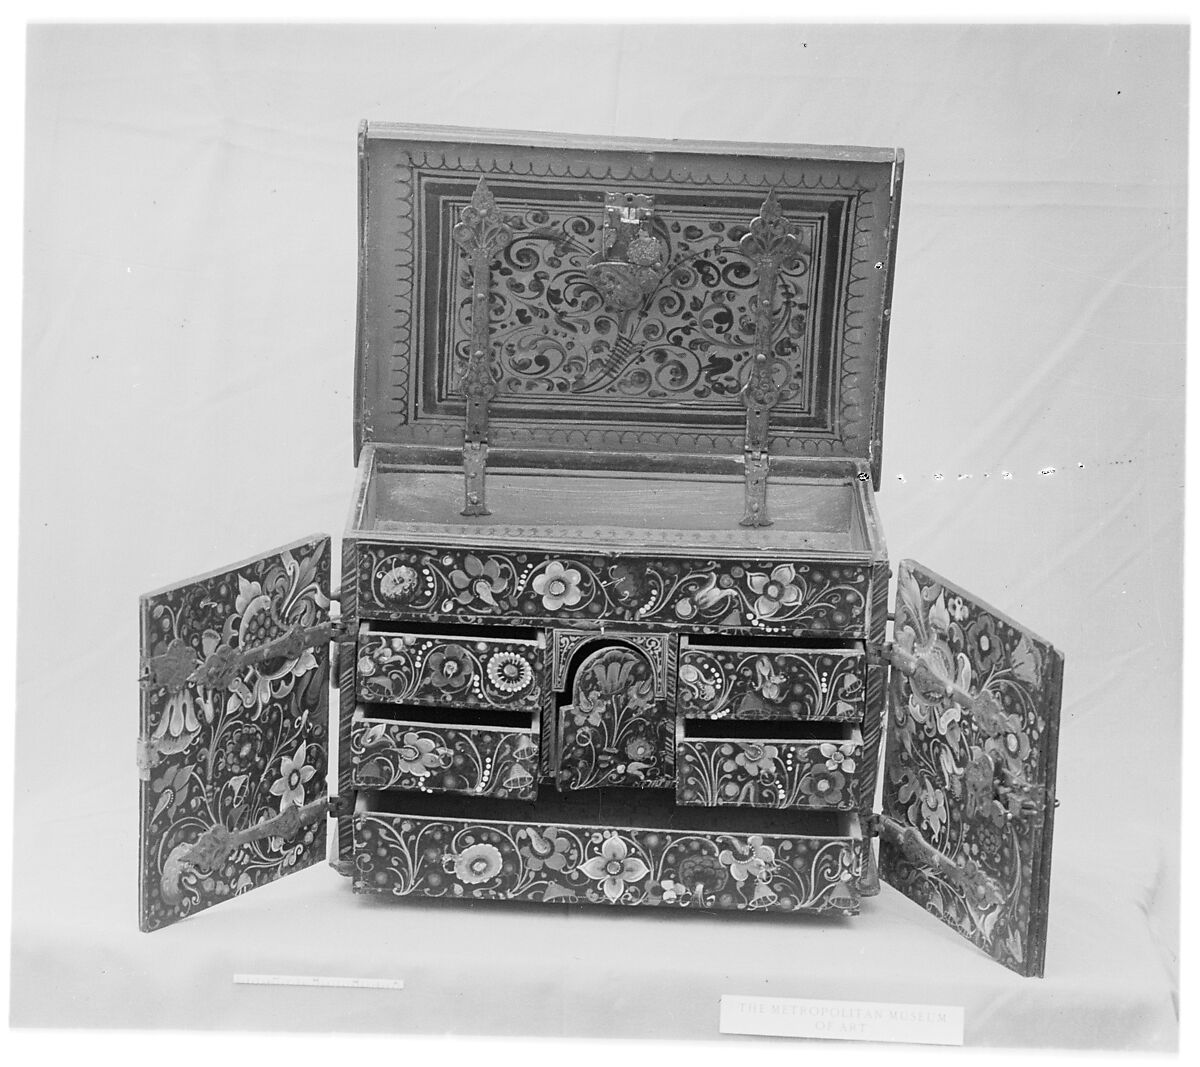 Box with the arms of the von Muelinen and von Effinger families of Bern, Wood, painted, Swiss 